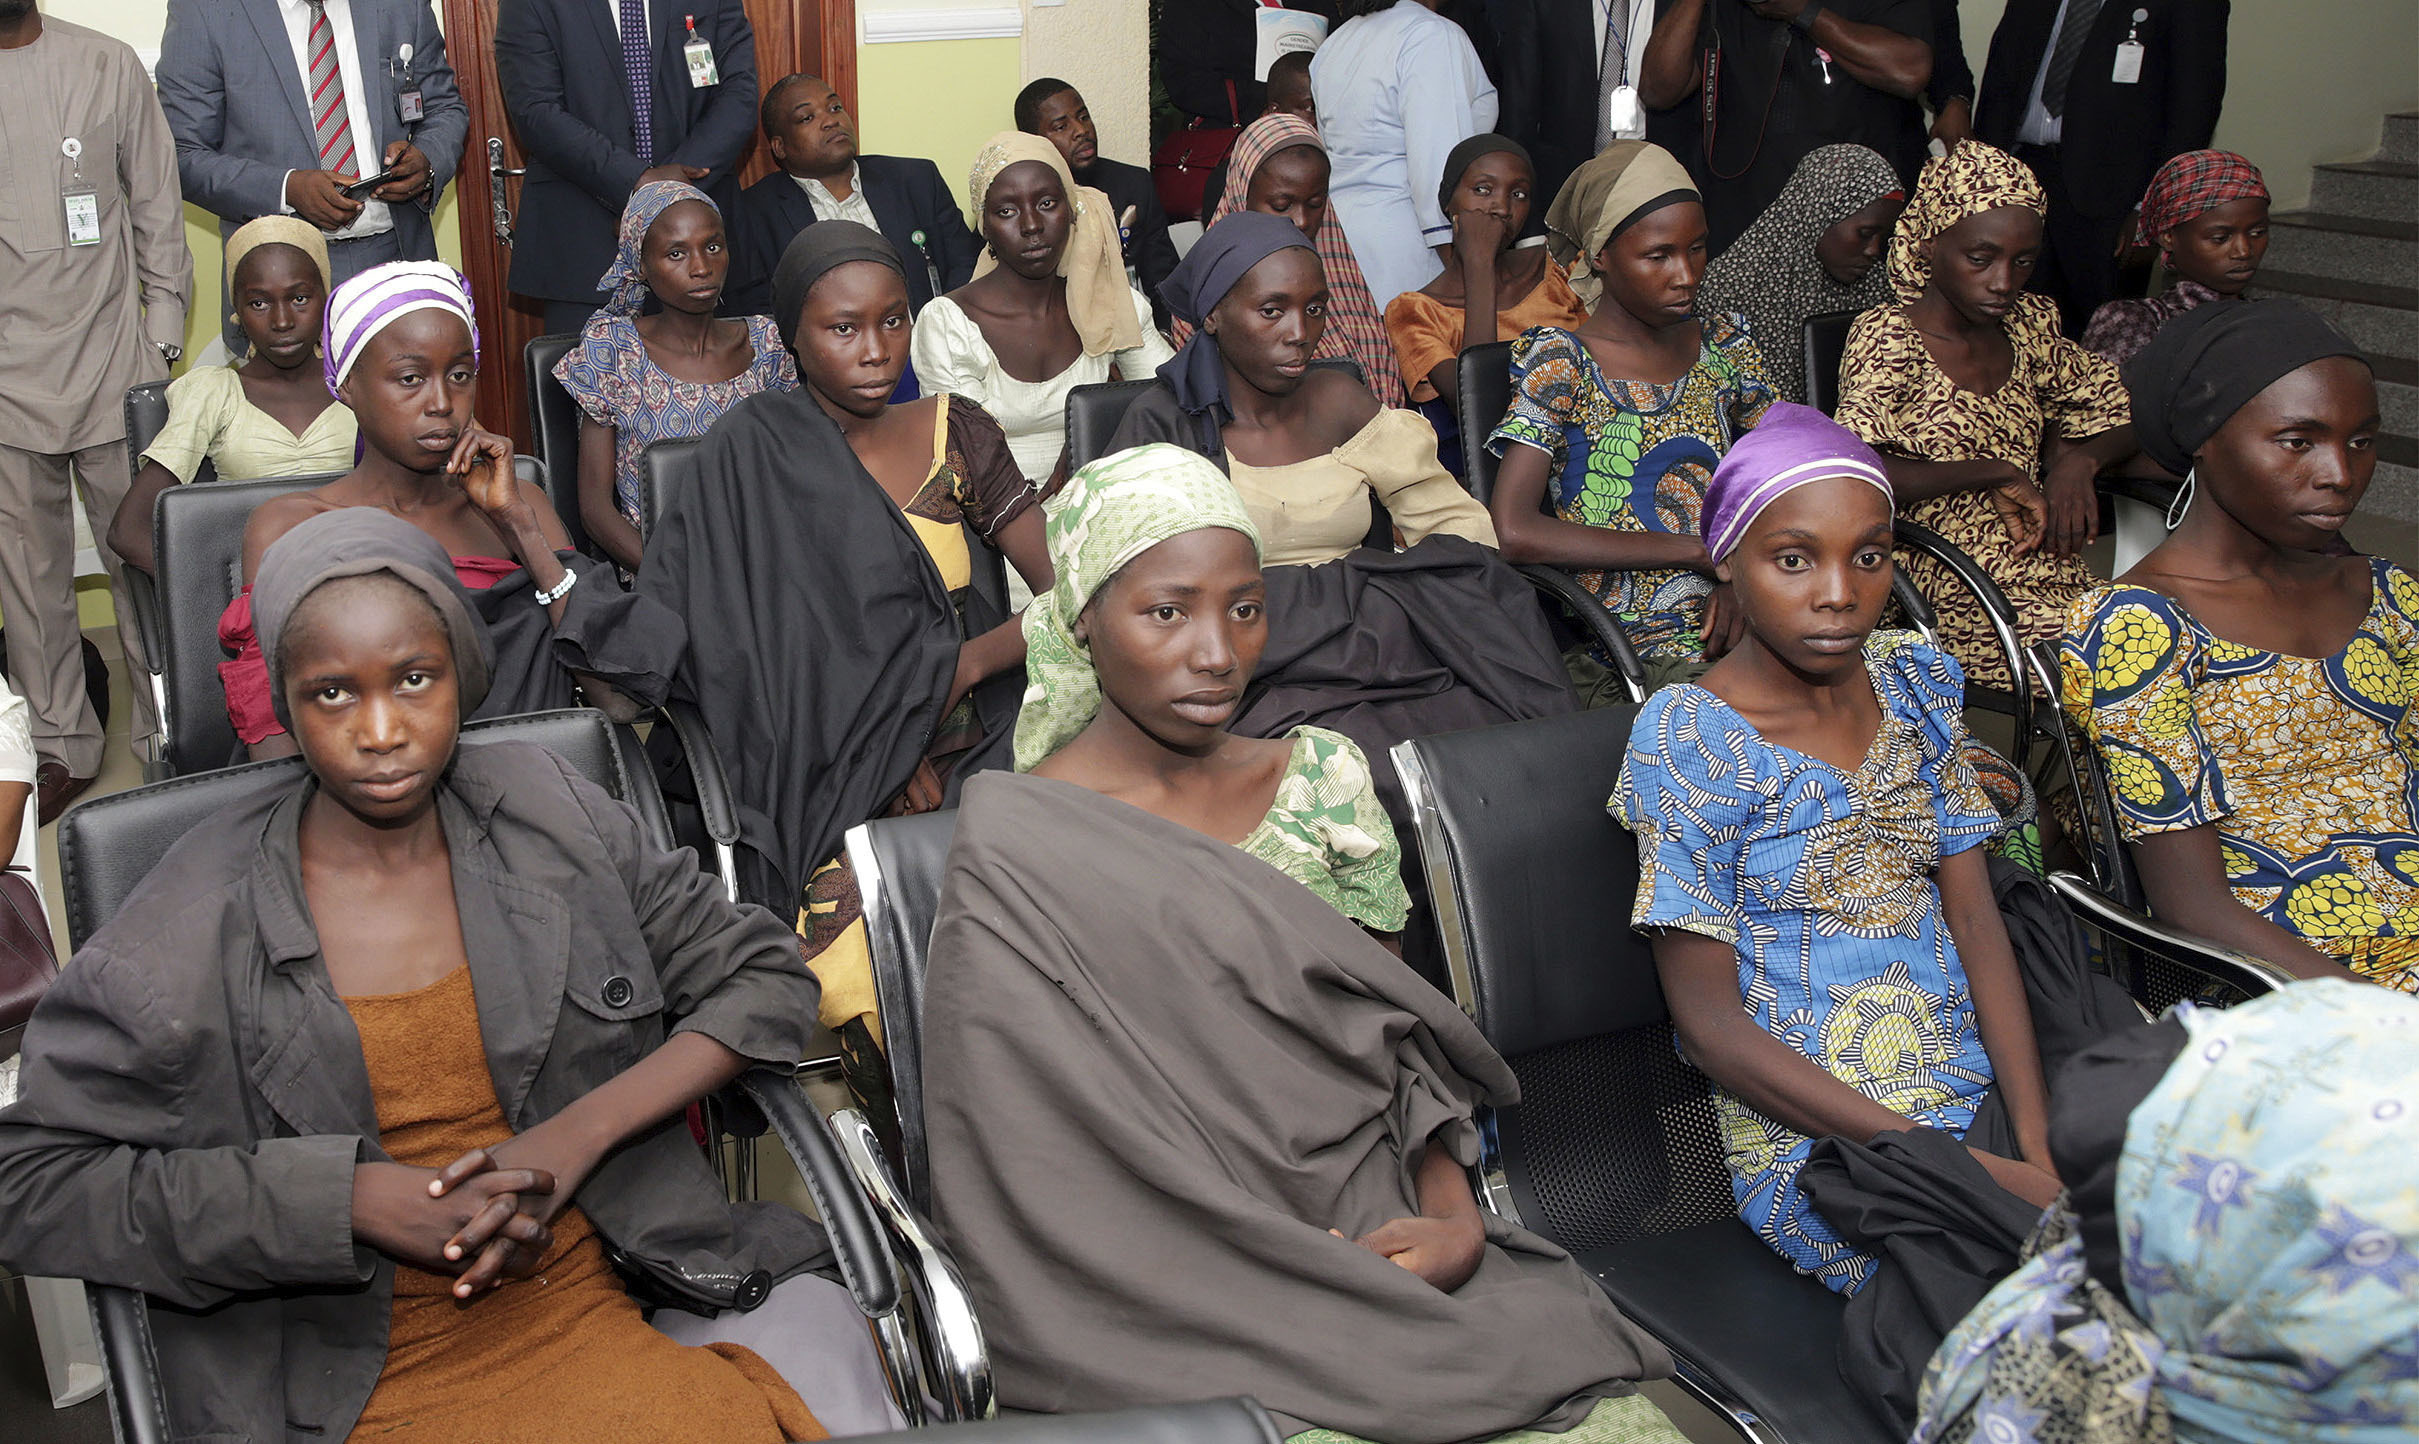 PHOTO: Chibok school girls recently freed from Islamic extremist captivity are seen during a meeting with Nigeria's Vice President Yemi Osinbajo, in Abuja, Nigeria, Oct. 13, 2016.  